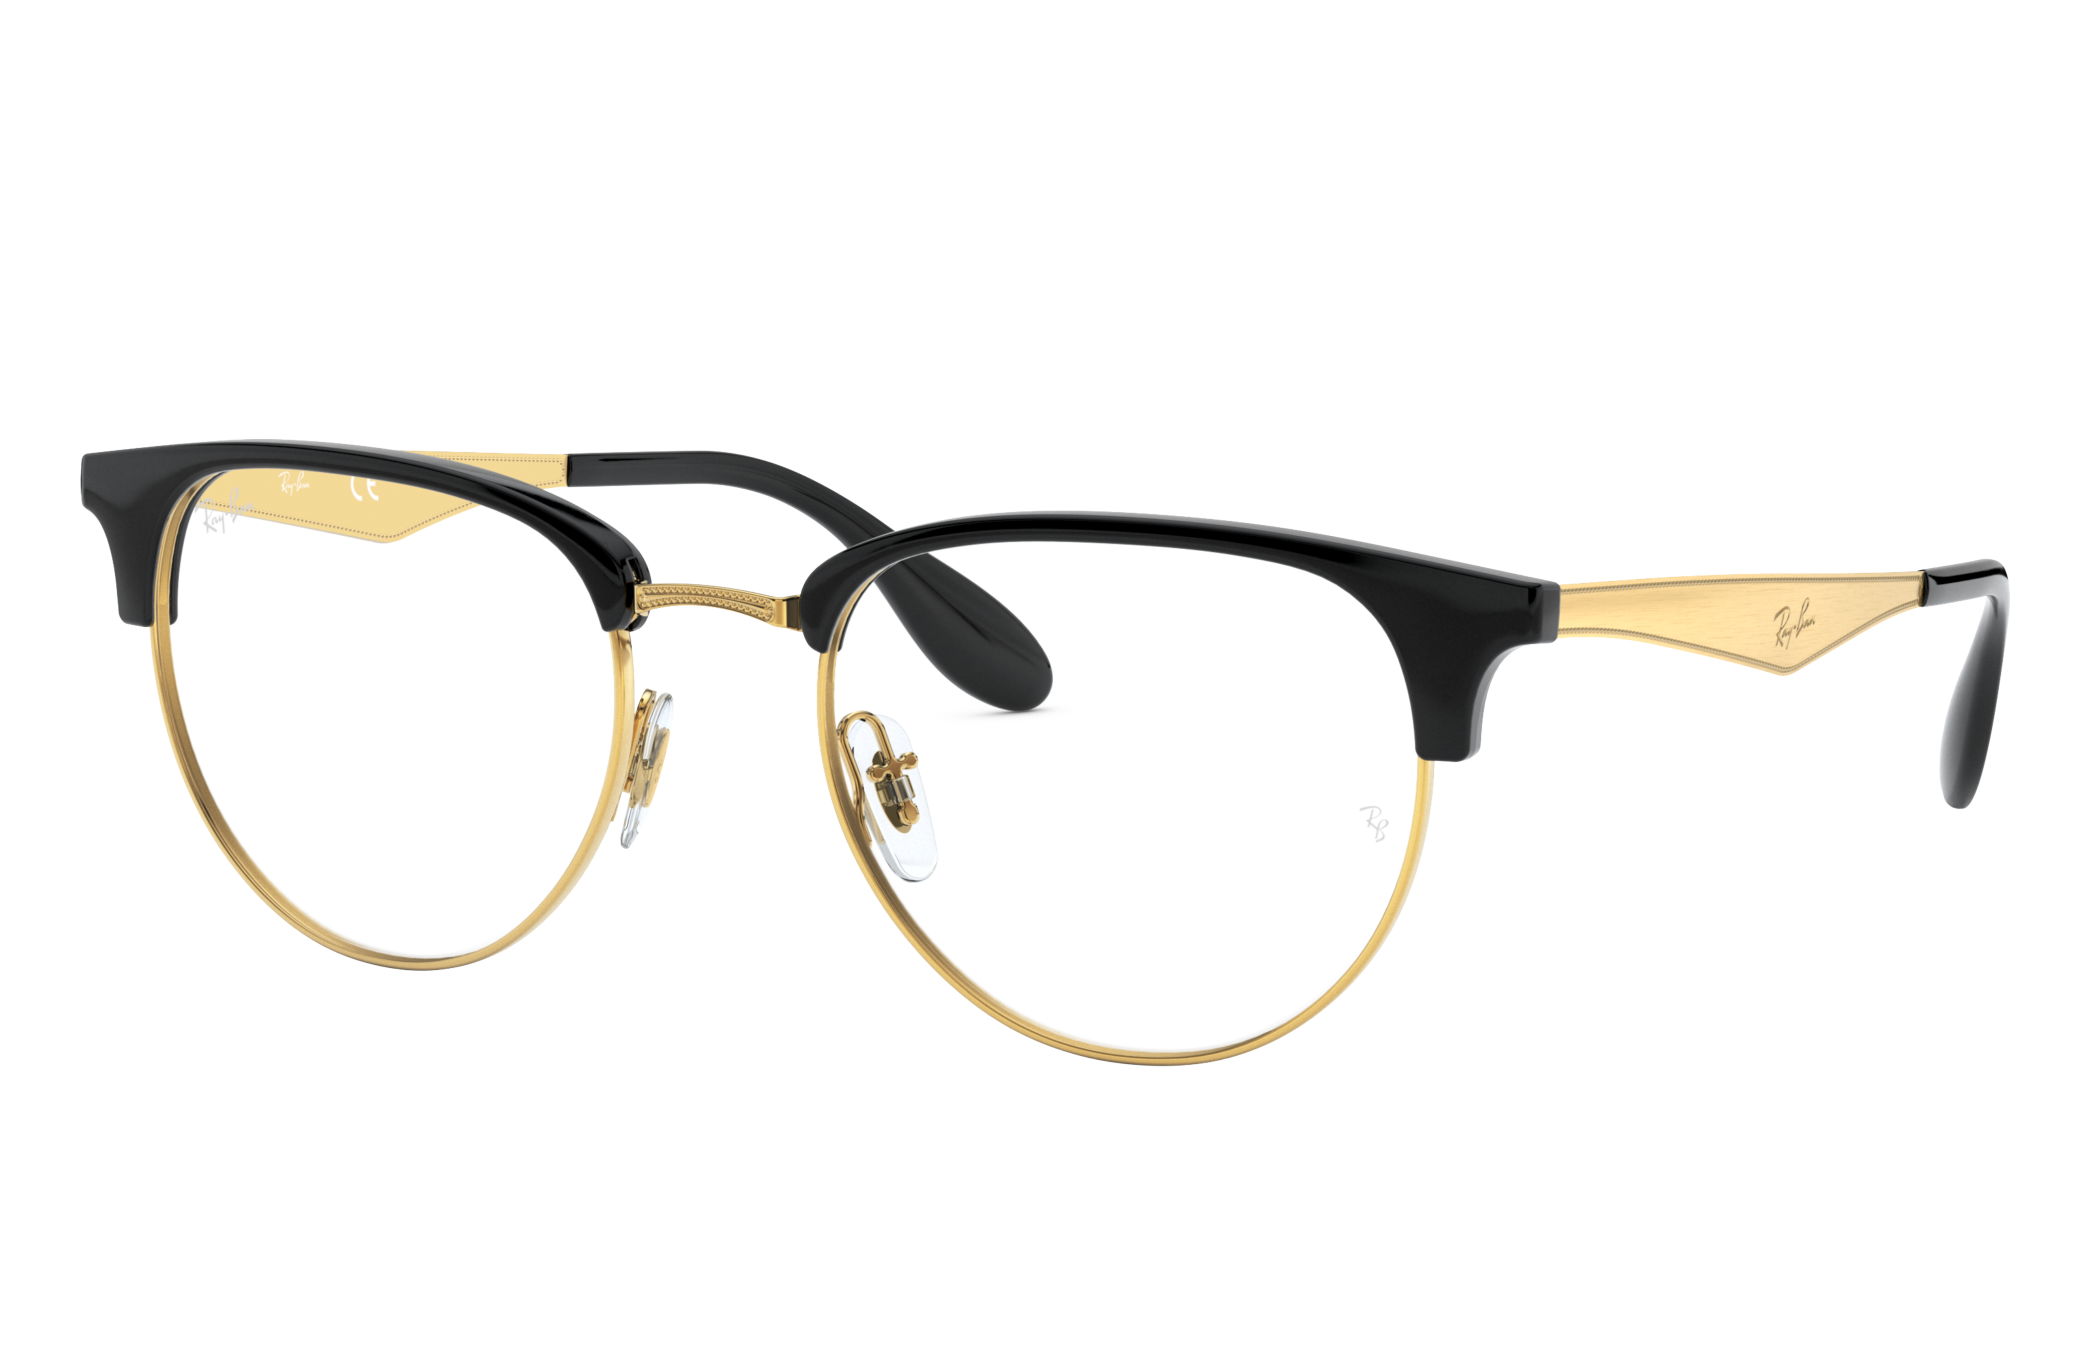 Arriba 119+ imagen black and gold ray ban glasses - Abzlocal.mx